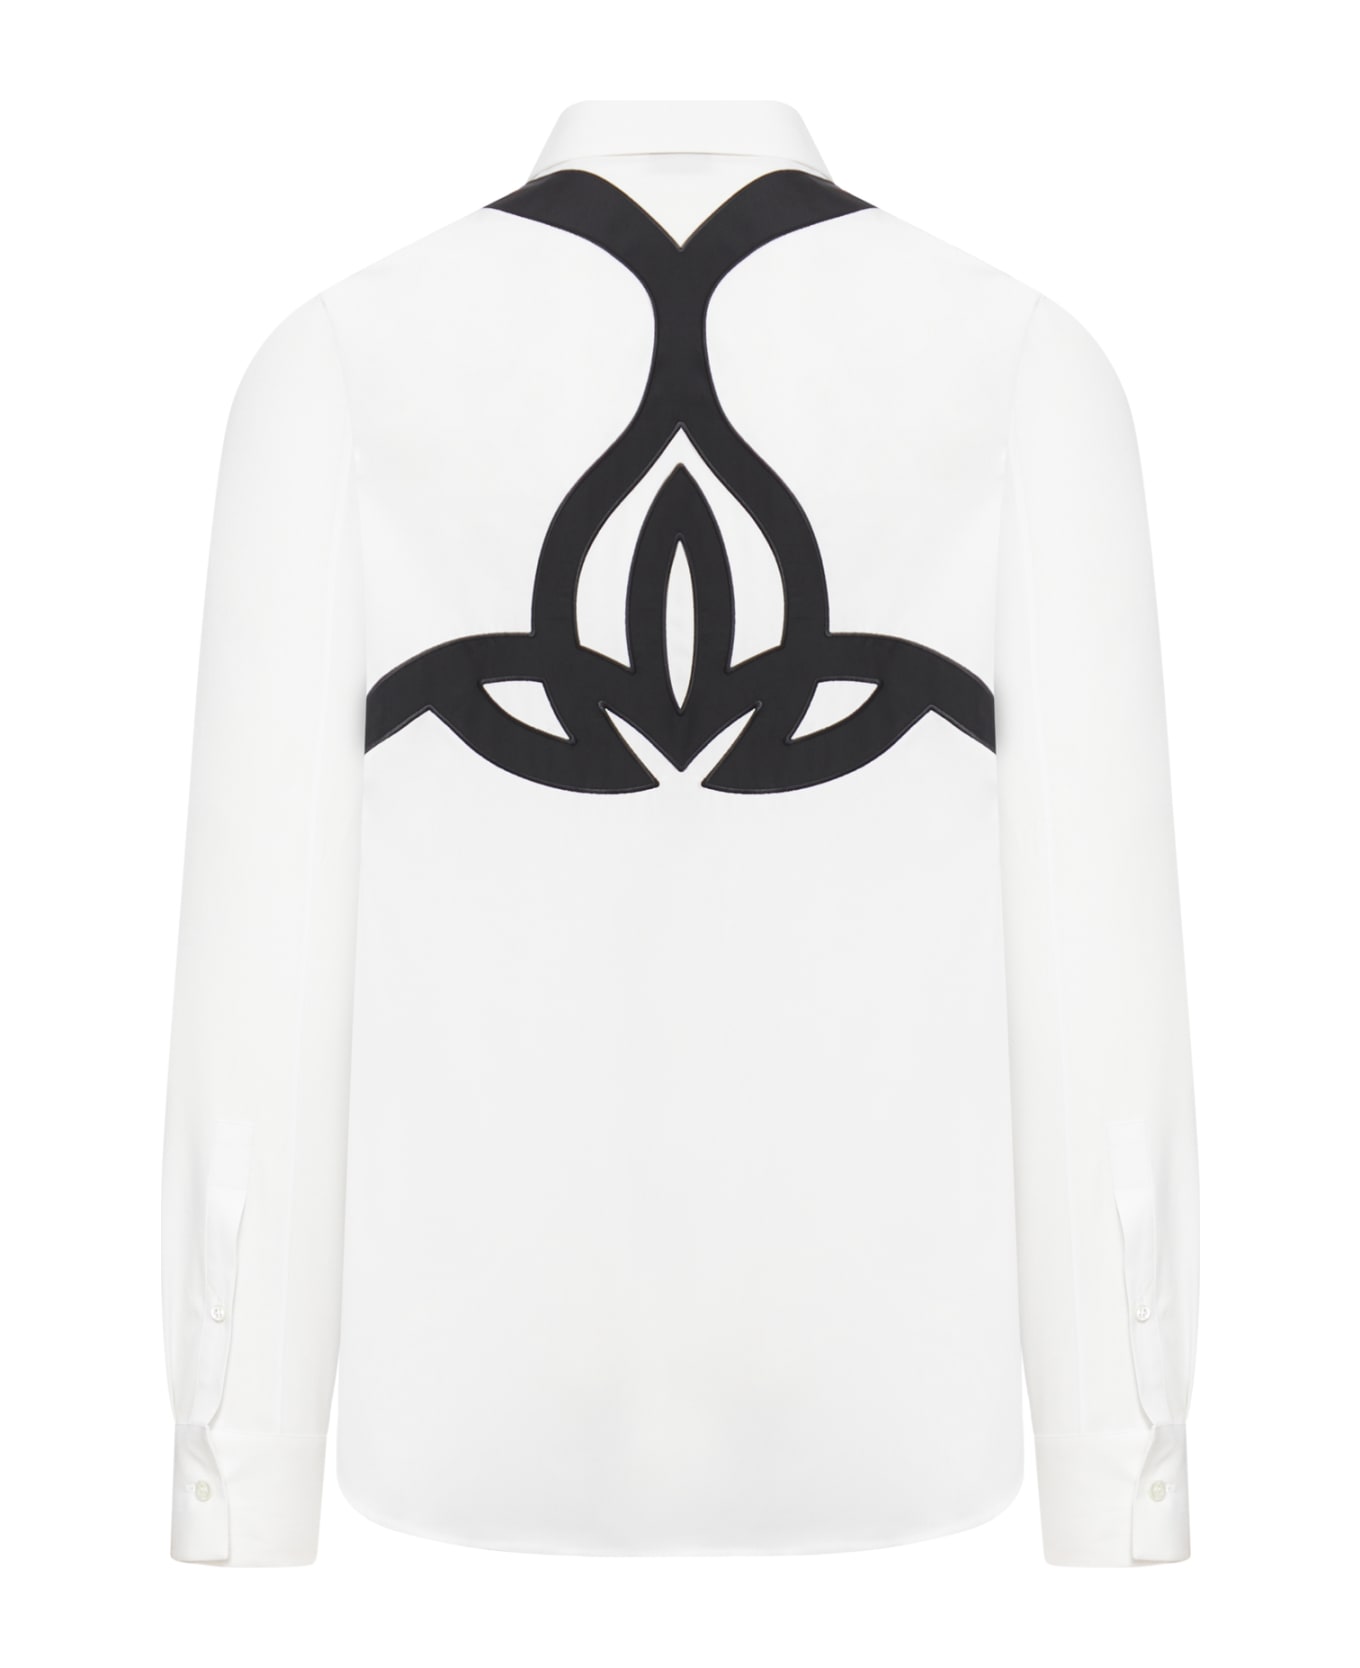 Alexander McQueen Graphic Printed Long Sleeved Shirt - Optical White